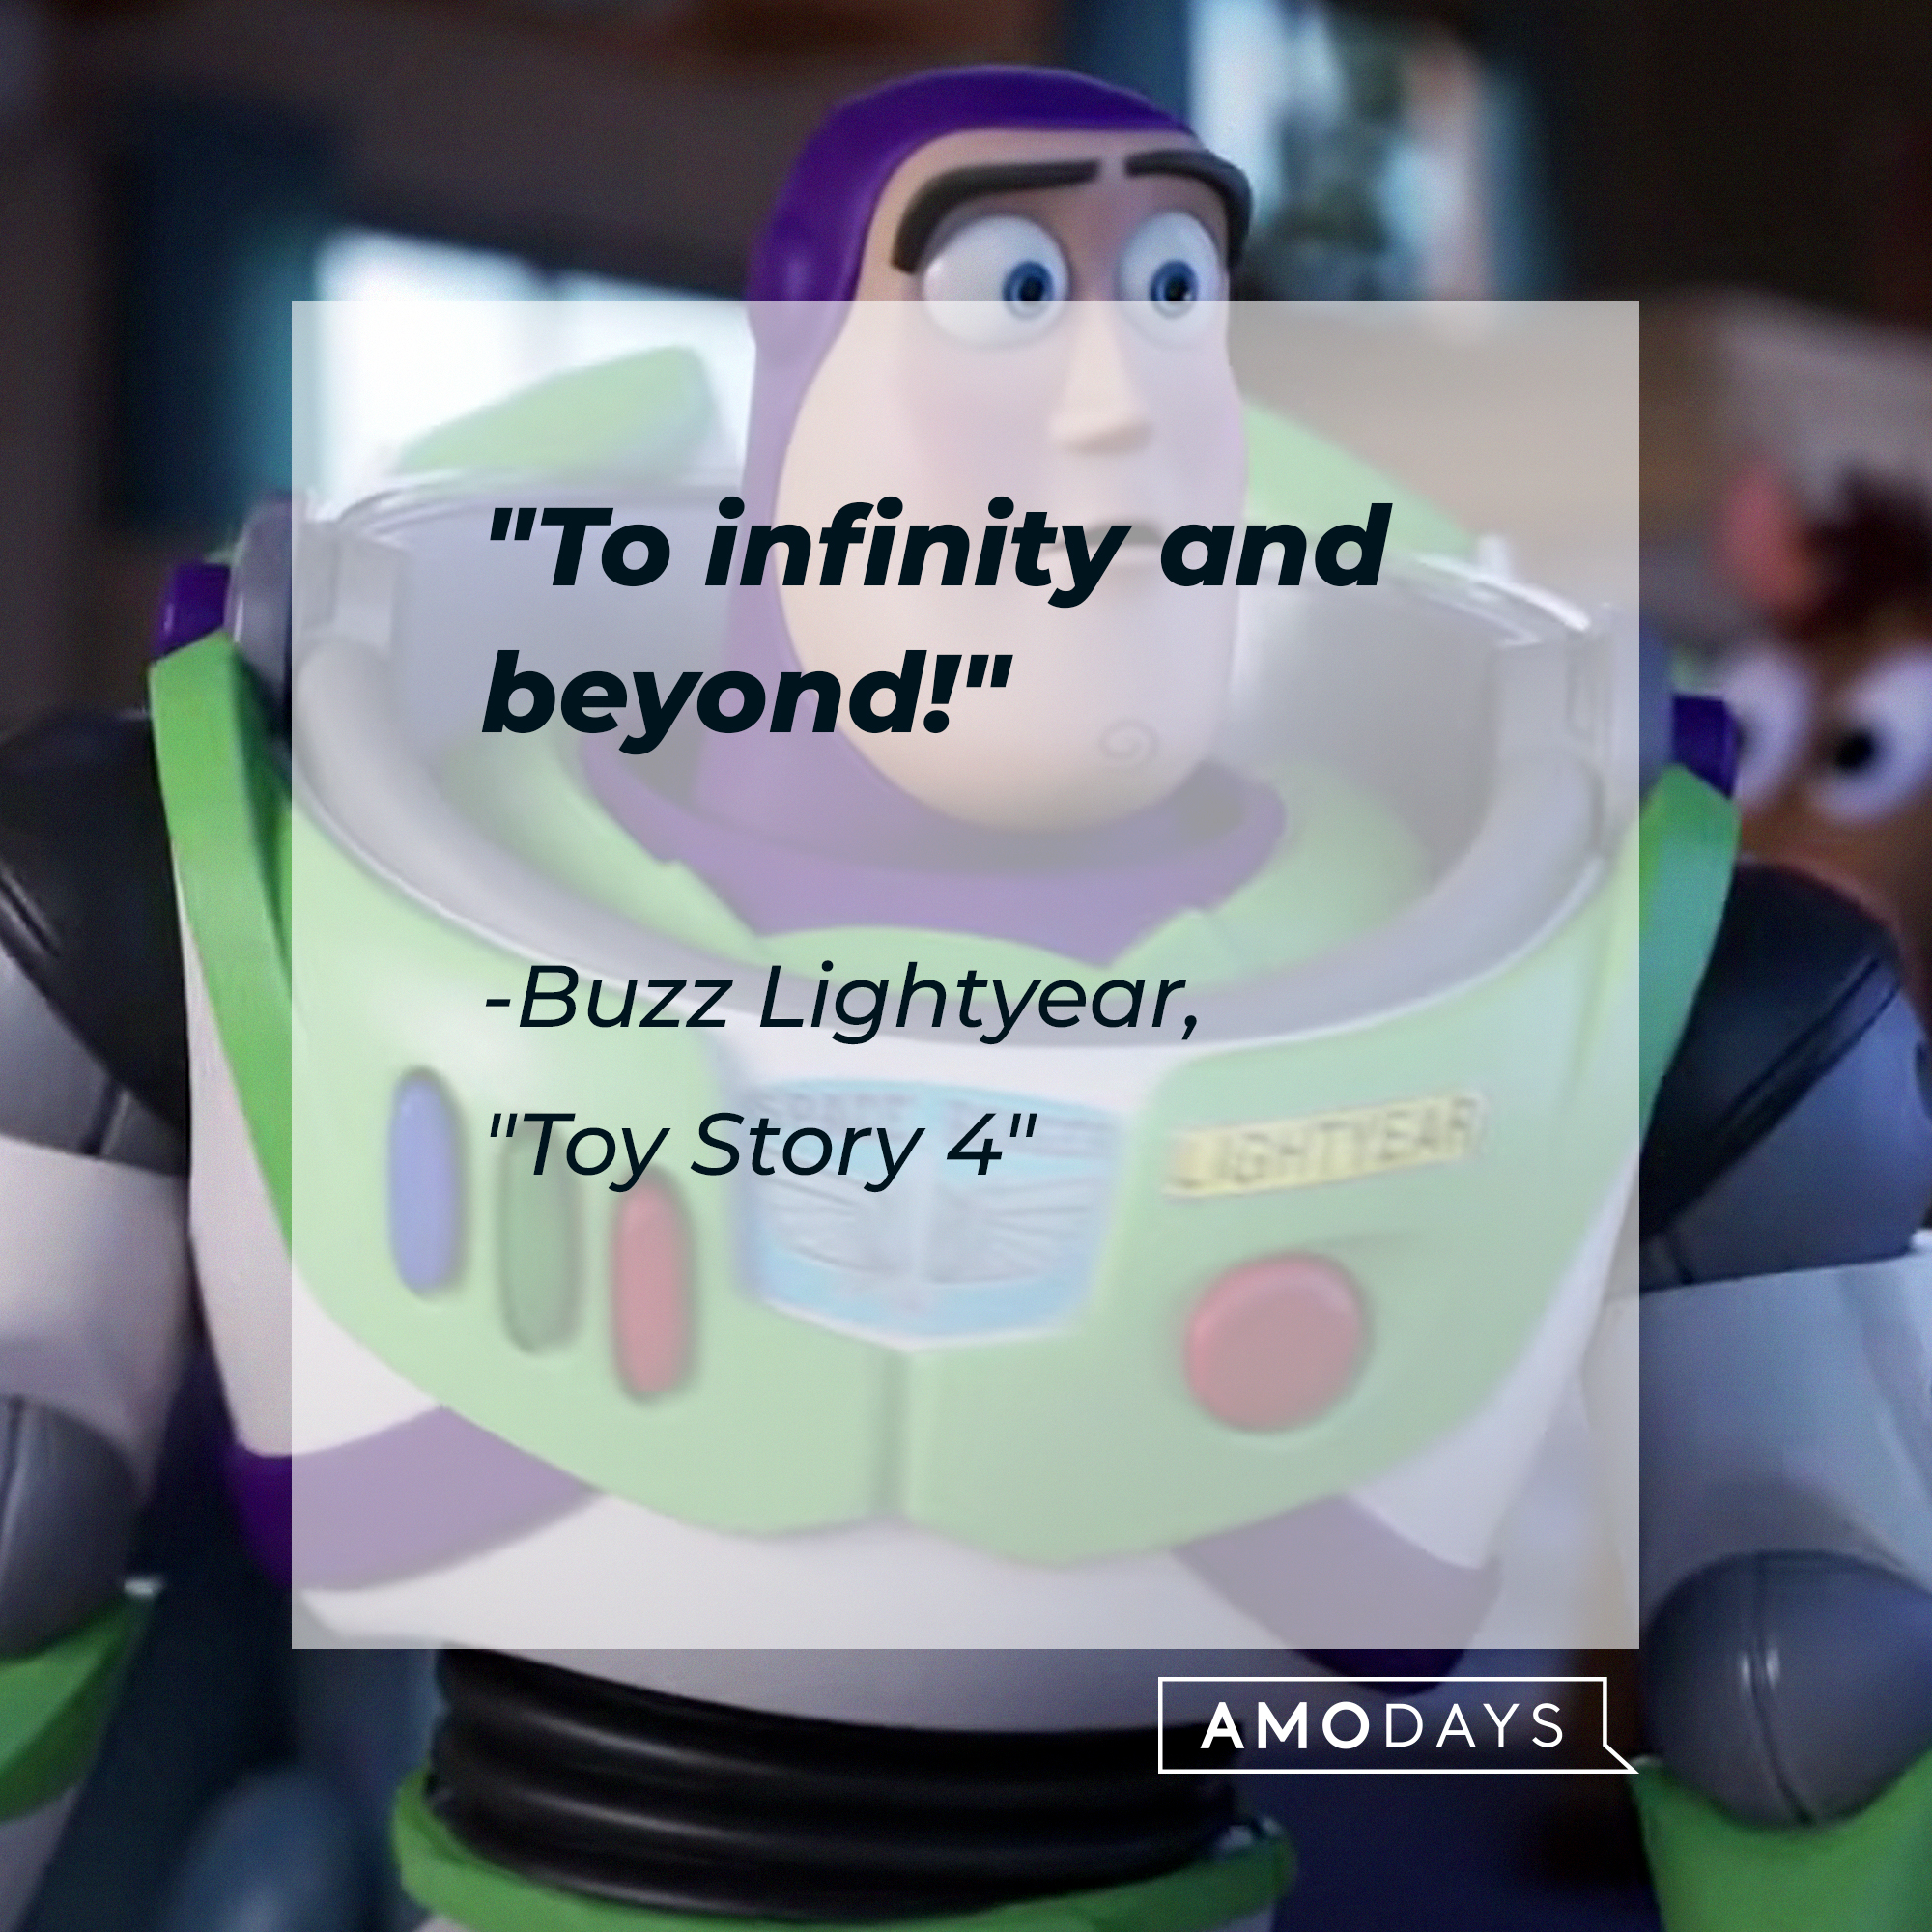 Buzz Lightyear's quote: "To infinity and beyond!" | Source: Youtube.com/Pixar